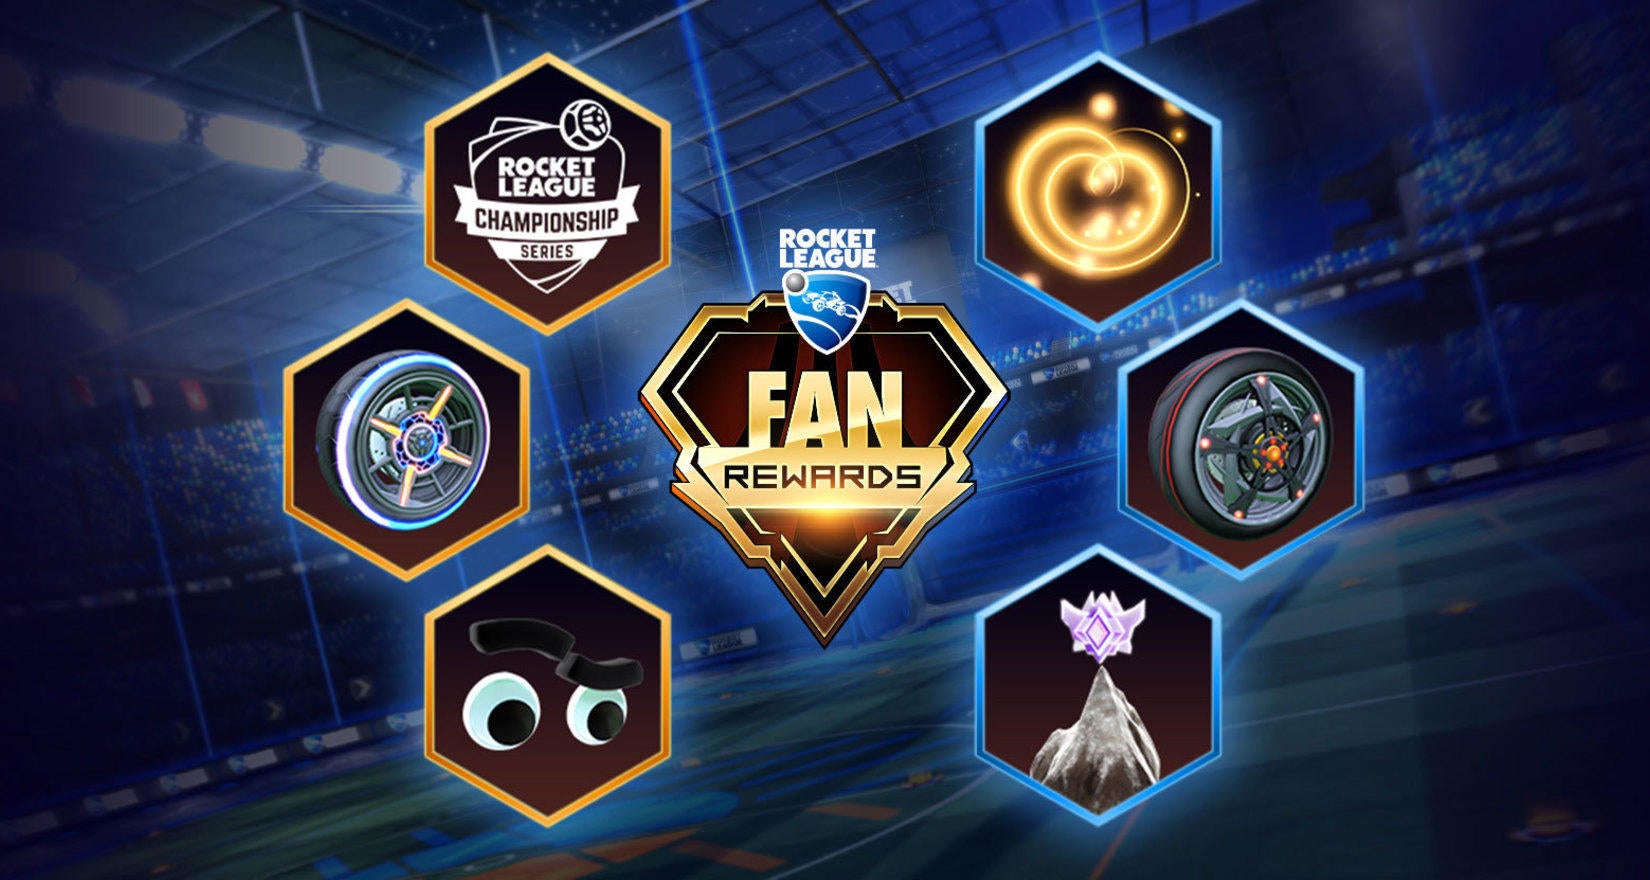 Get in-game rewards for watching the Rocket League Championship on Twitch (June 2-4) Alienware Arena